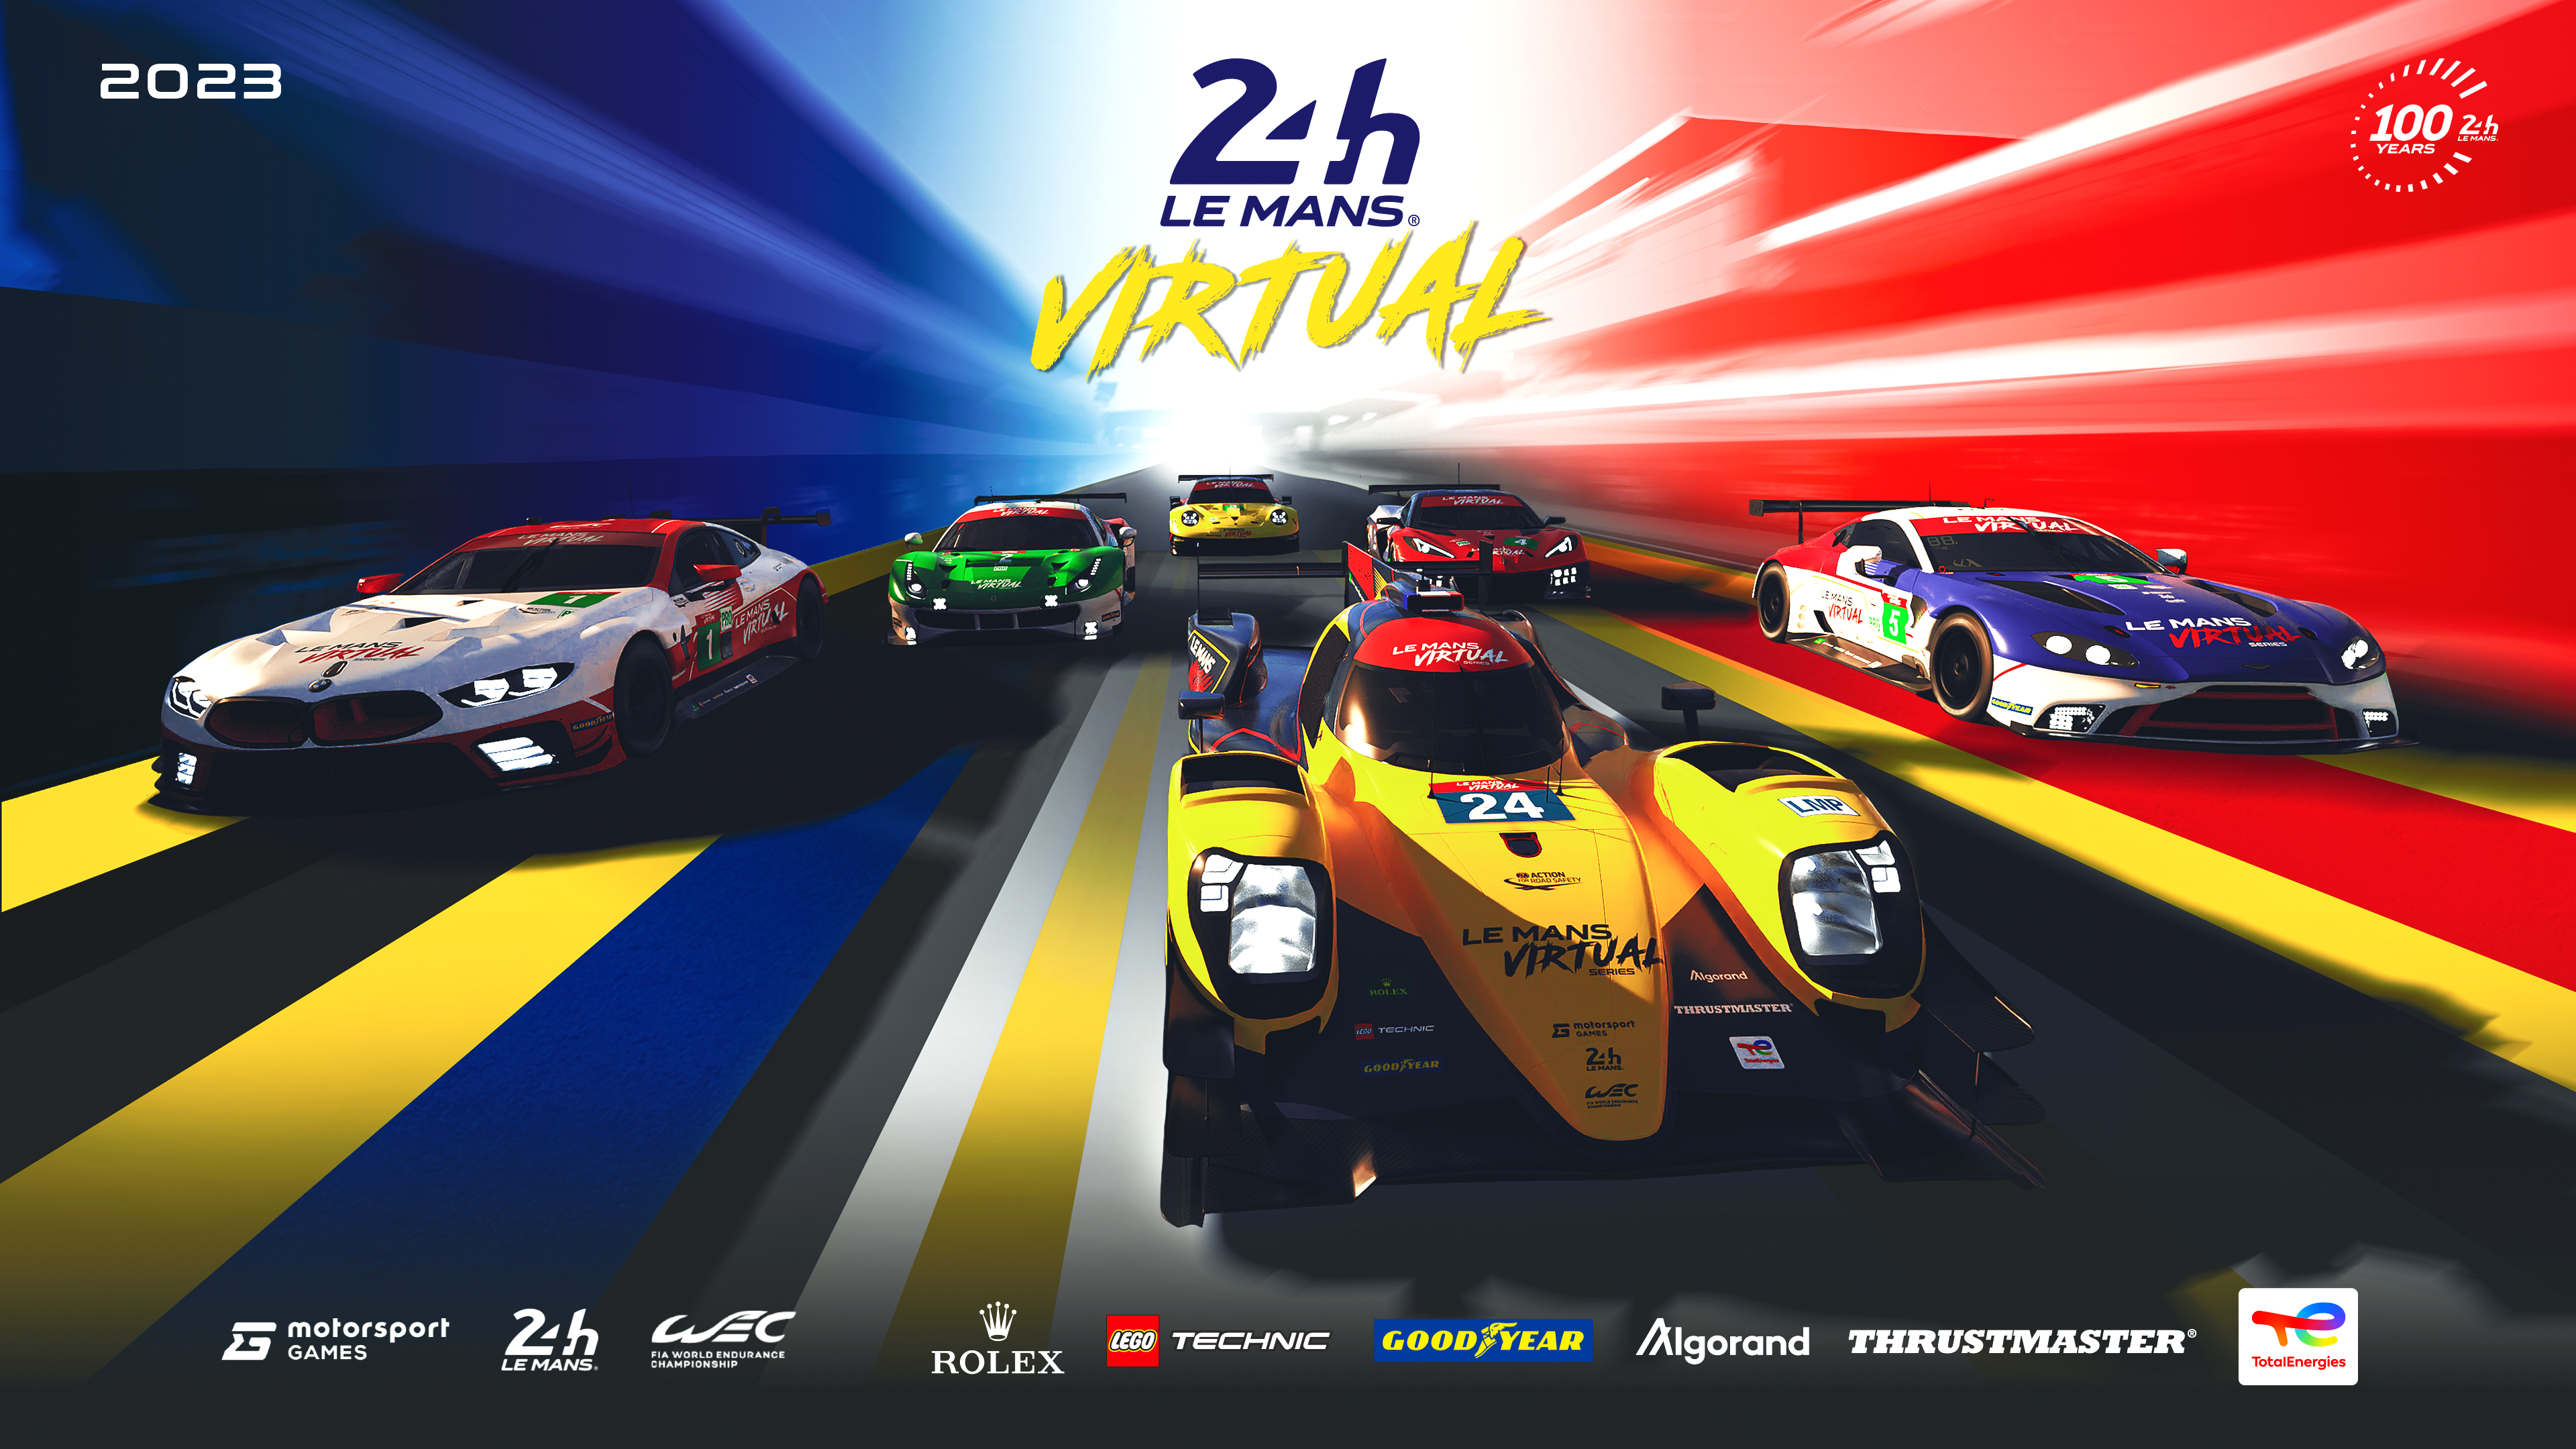 Poster for the virtual 24 Hours of Le Mans race.